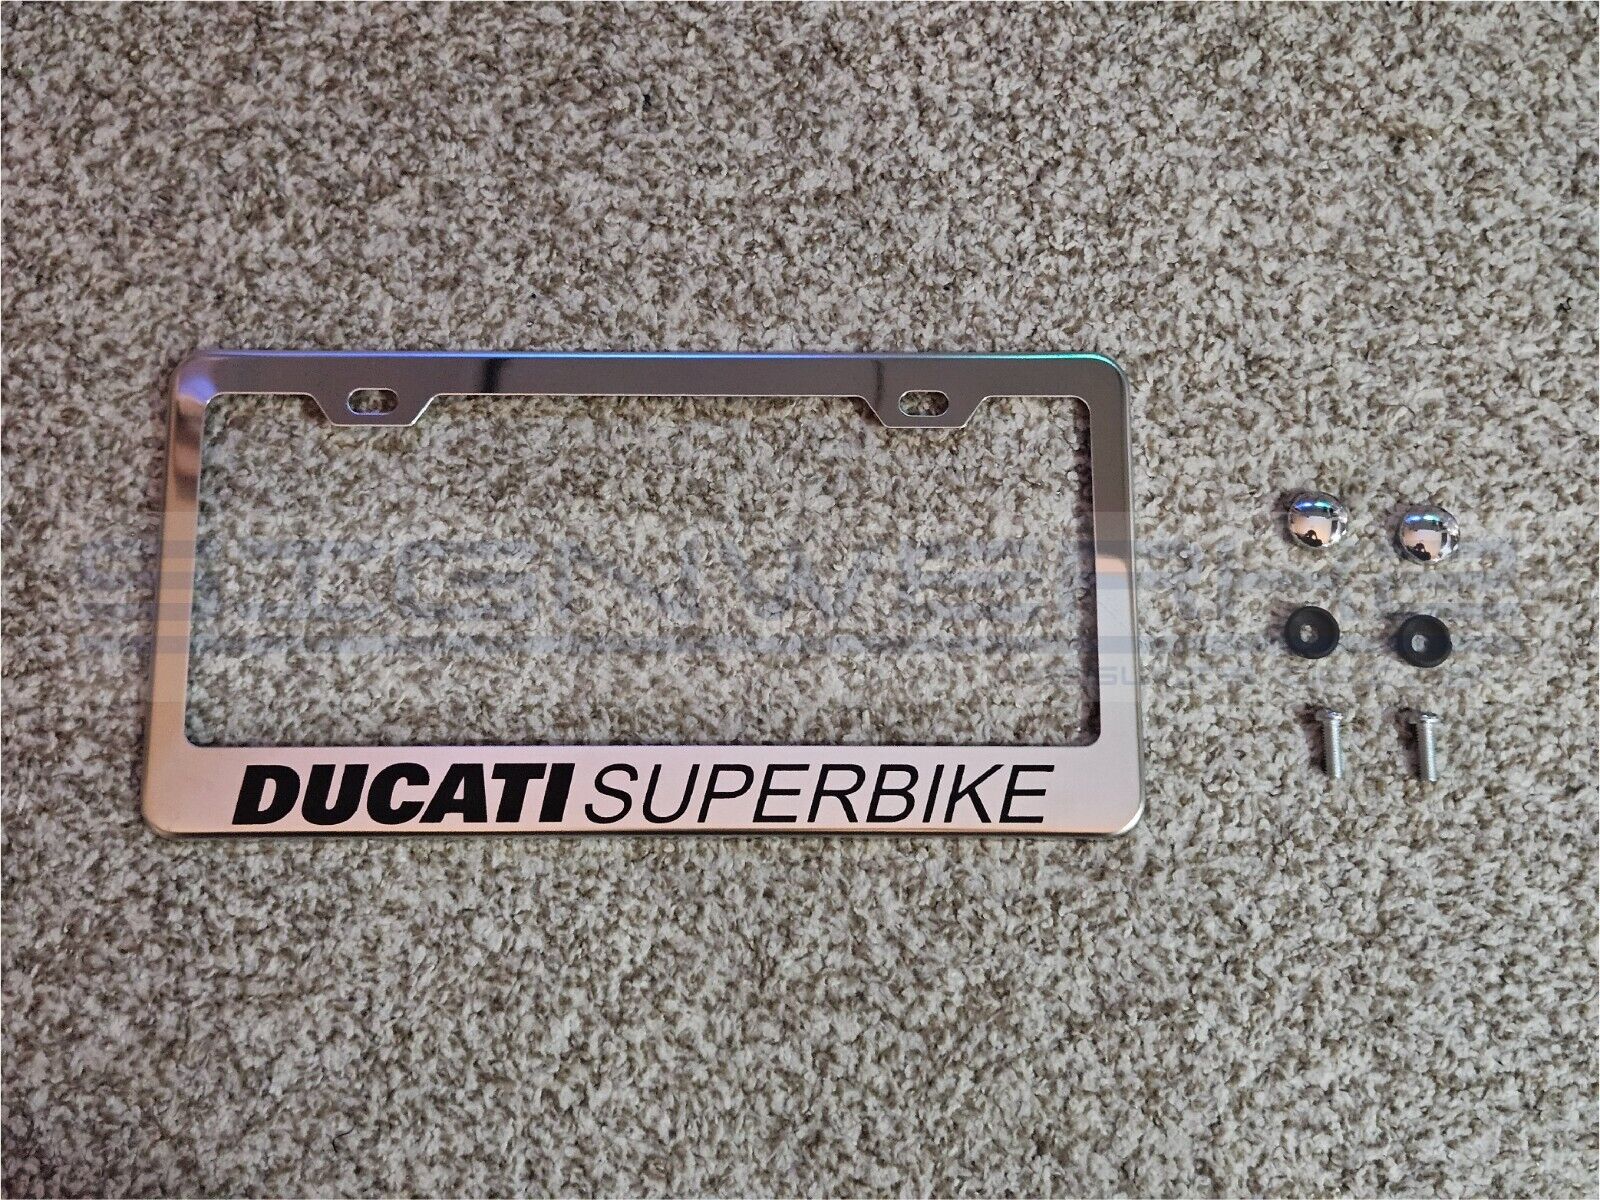 Ducati Superbike Chrome Stainless Steel US/Canada License Plate Frame